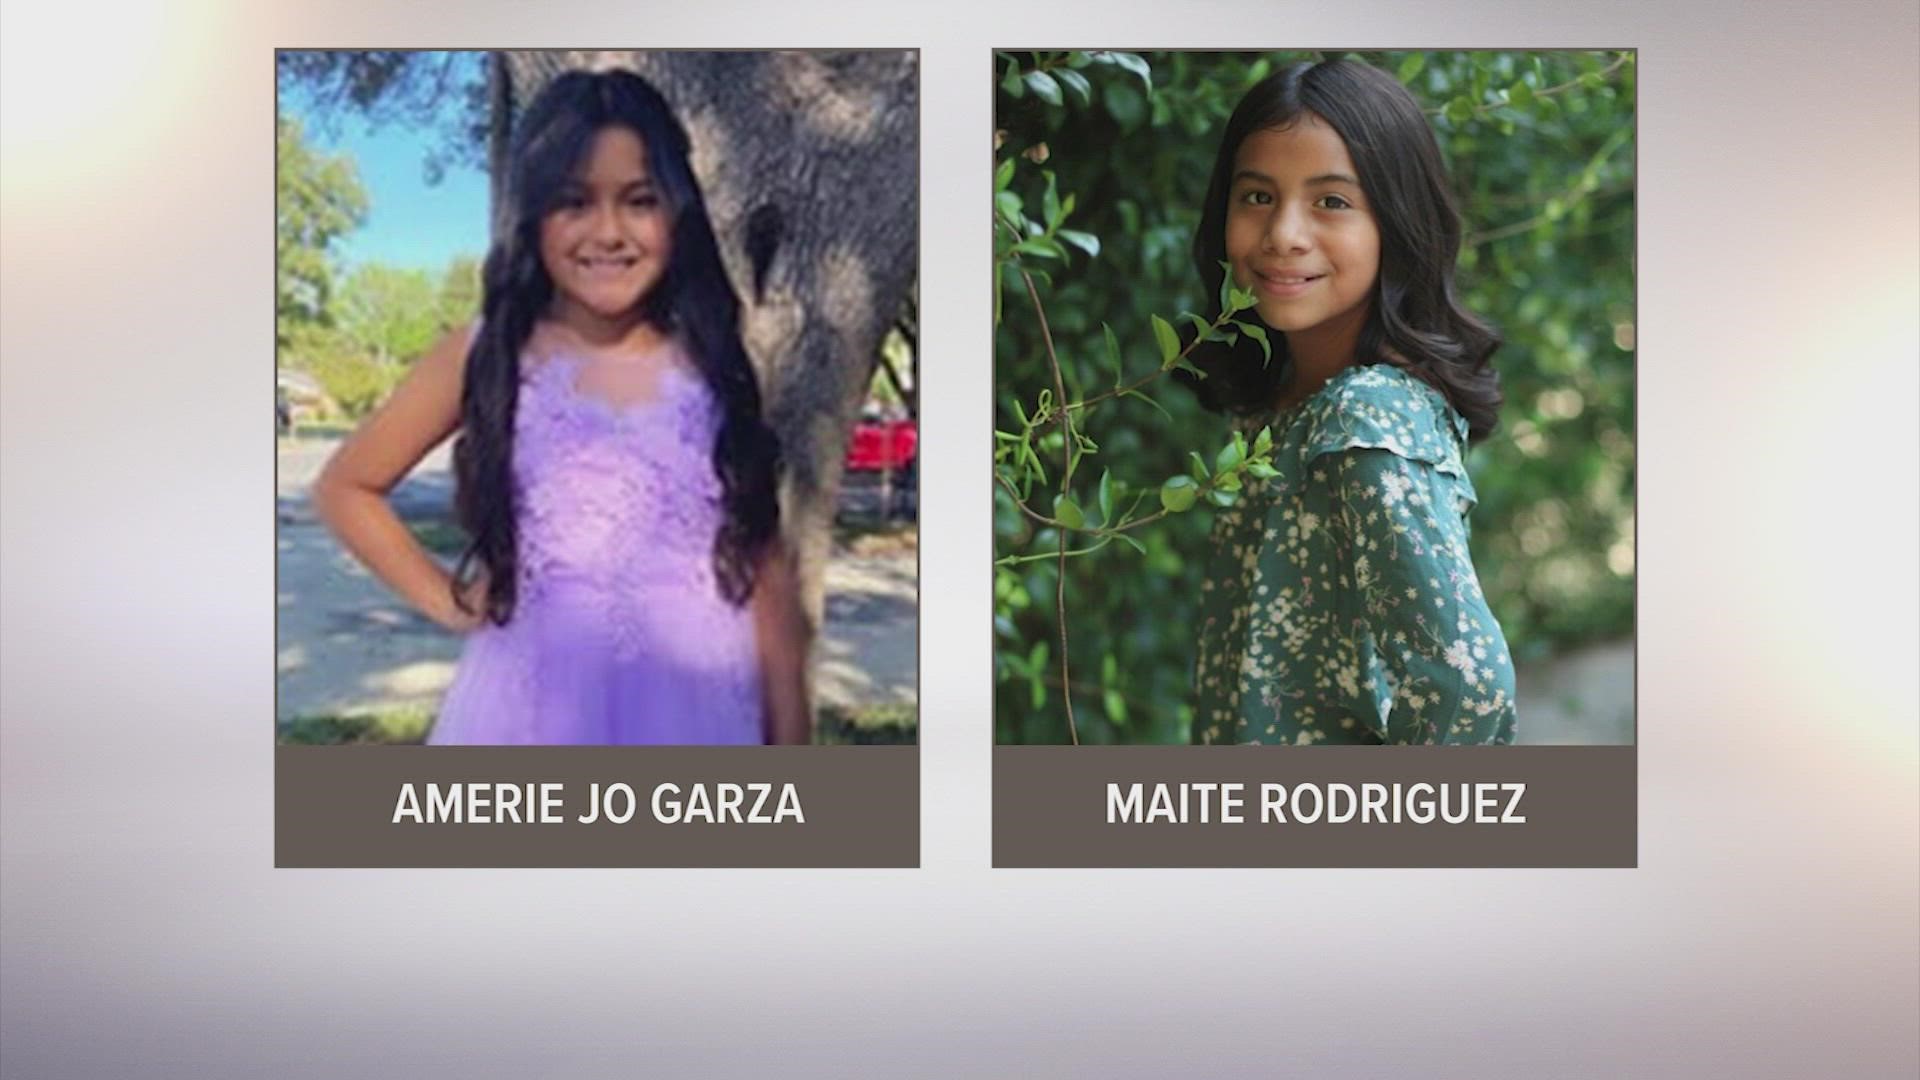 Ameria Jo Garza and Maite Rodriguez were laid to rest on Tuesday, one week after the deadliest school shooting in Texas history.